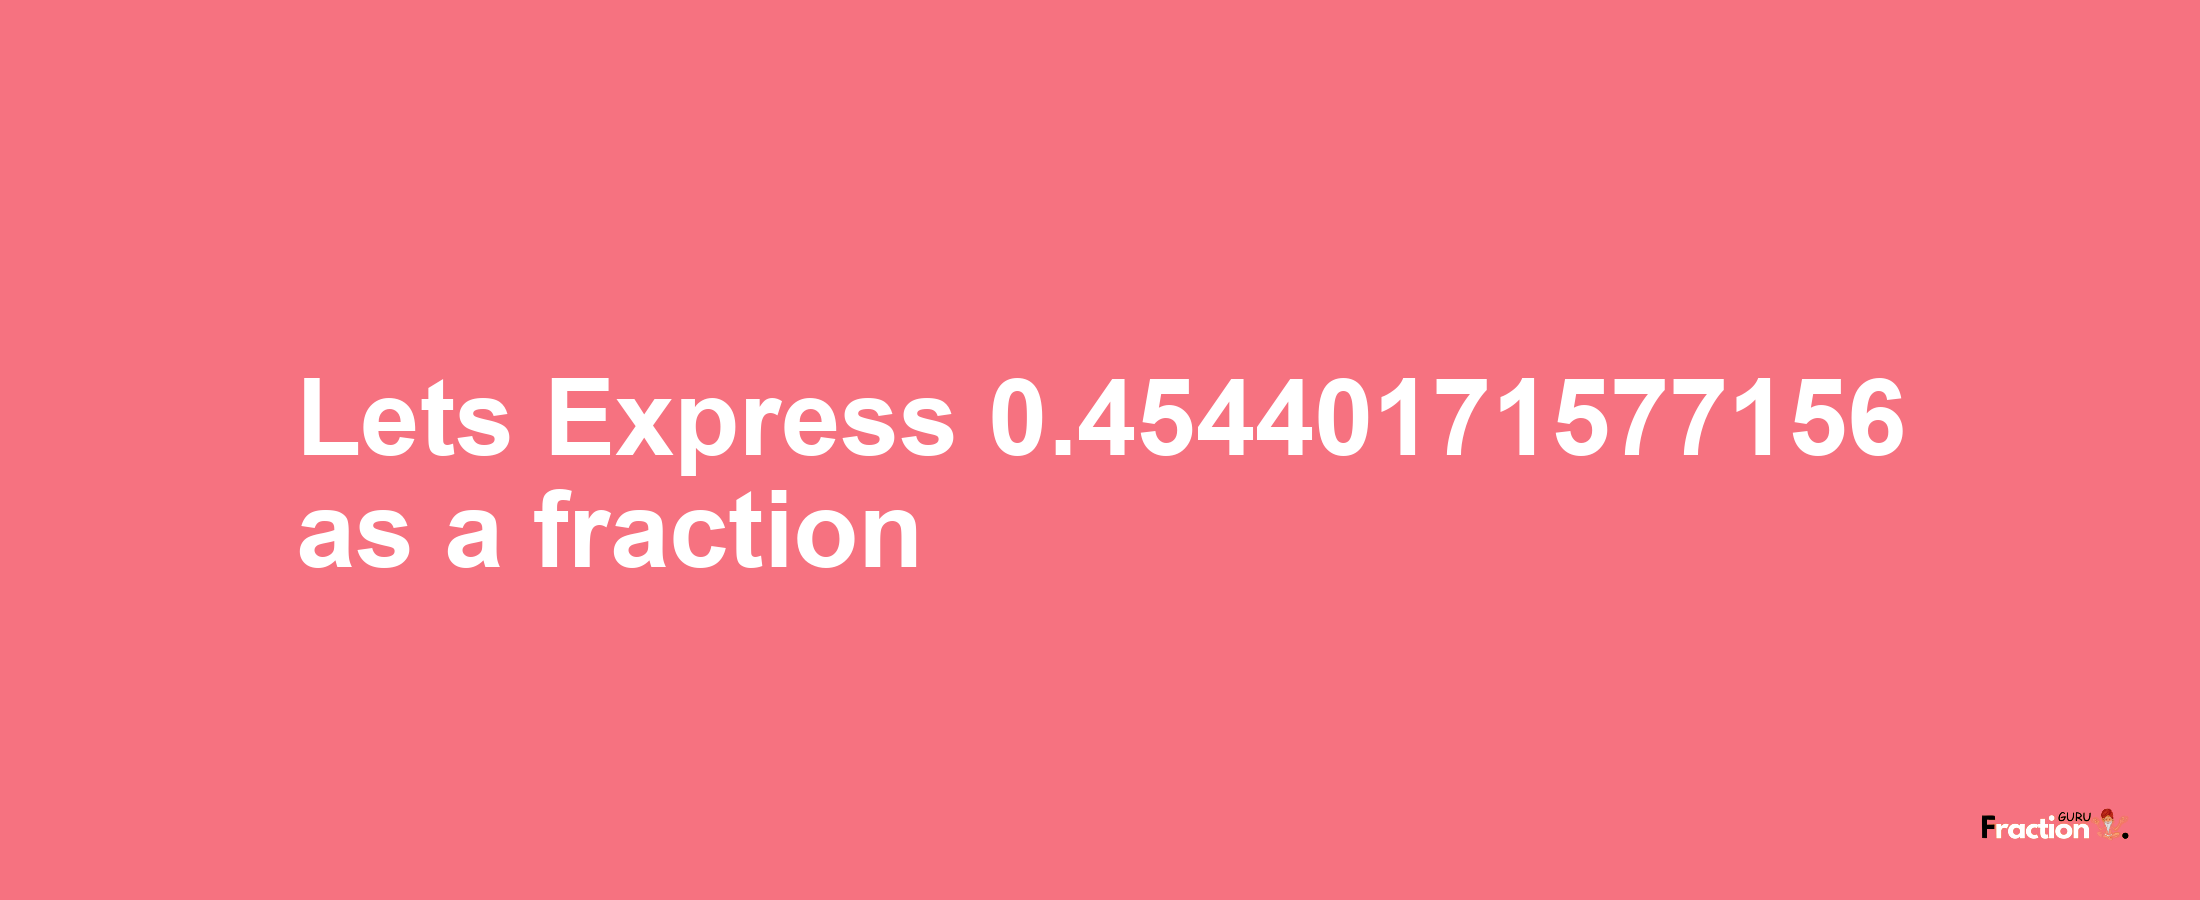 Lets Express 0.45440171577156 as afraction